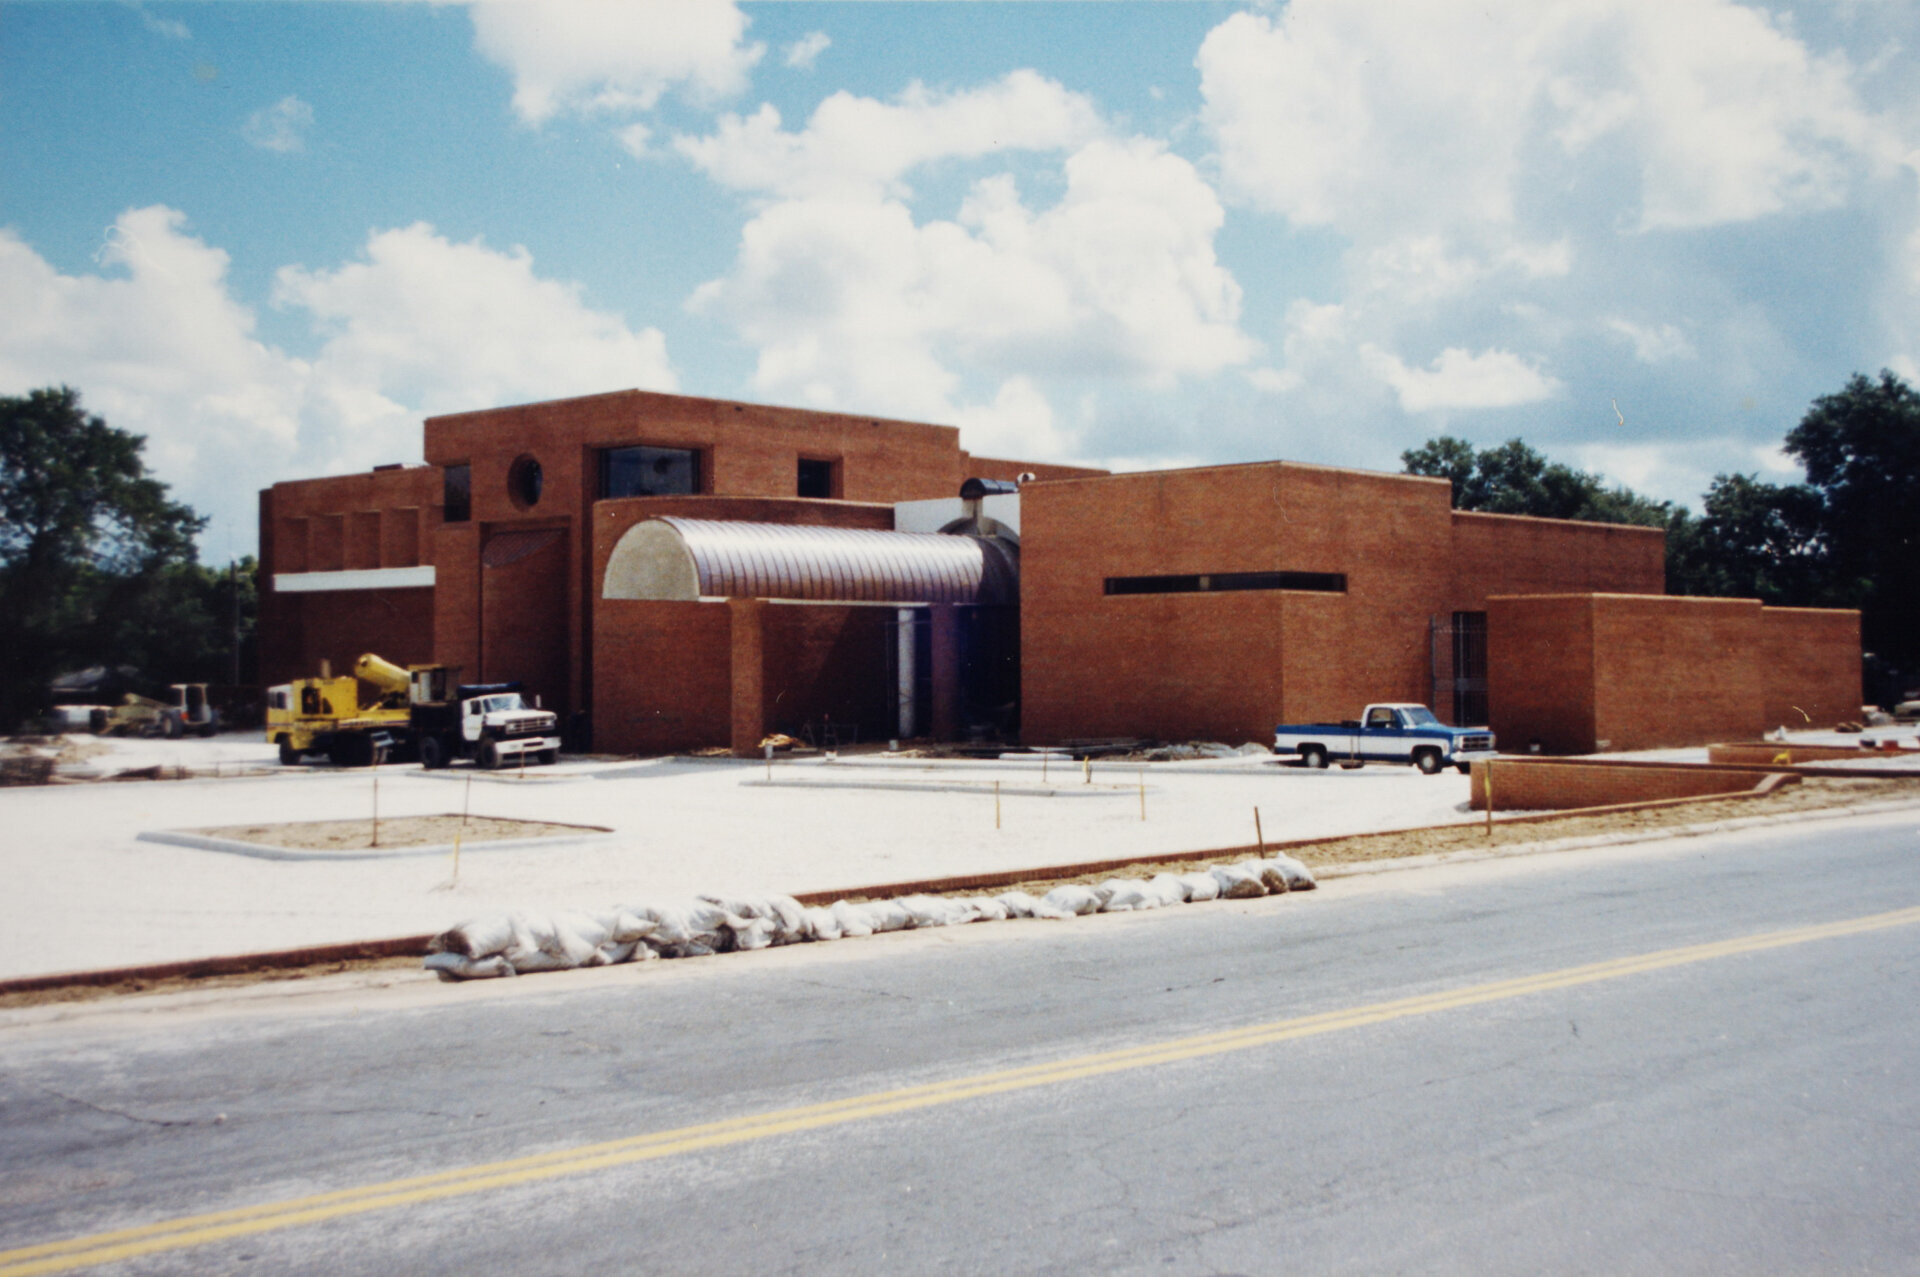  Construction of the Museum’s current home, which was formally dedicated in September 1988 